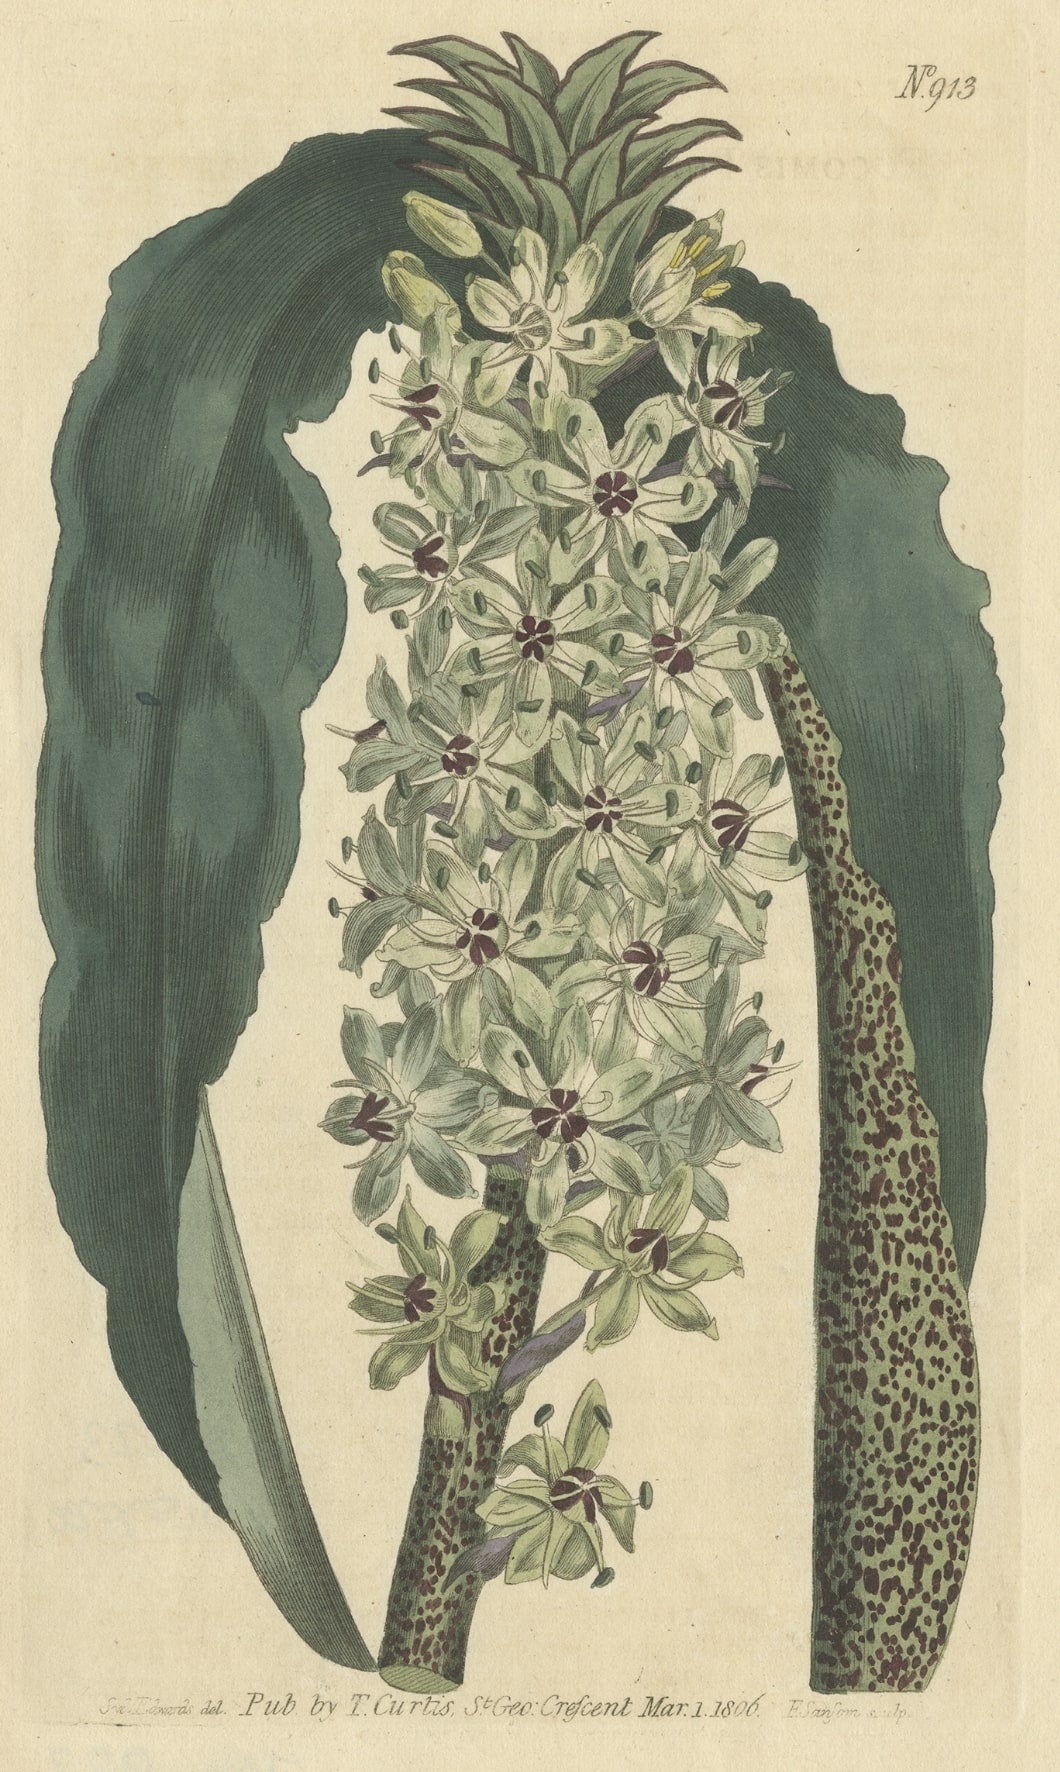 Antique botany print of Eucomis Comosa, also known as pineapple flower, pineapple lily or wine eucomis. 

This print originates from 'Curtis's botanical magazine'. 

Artists and Engravers: Curtis's Botanical Magazine is the longest running botanical